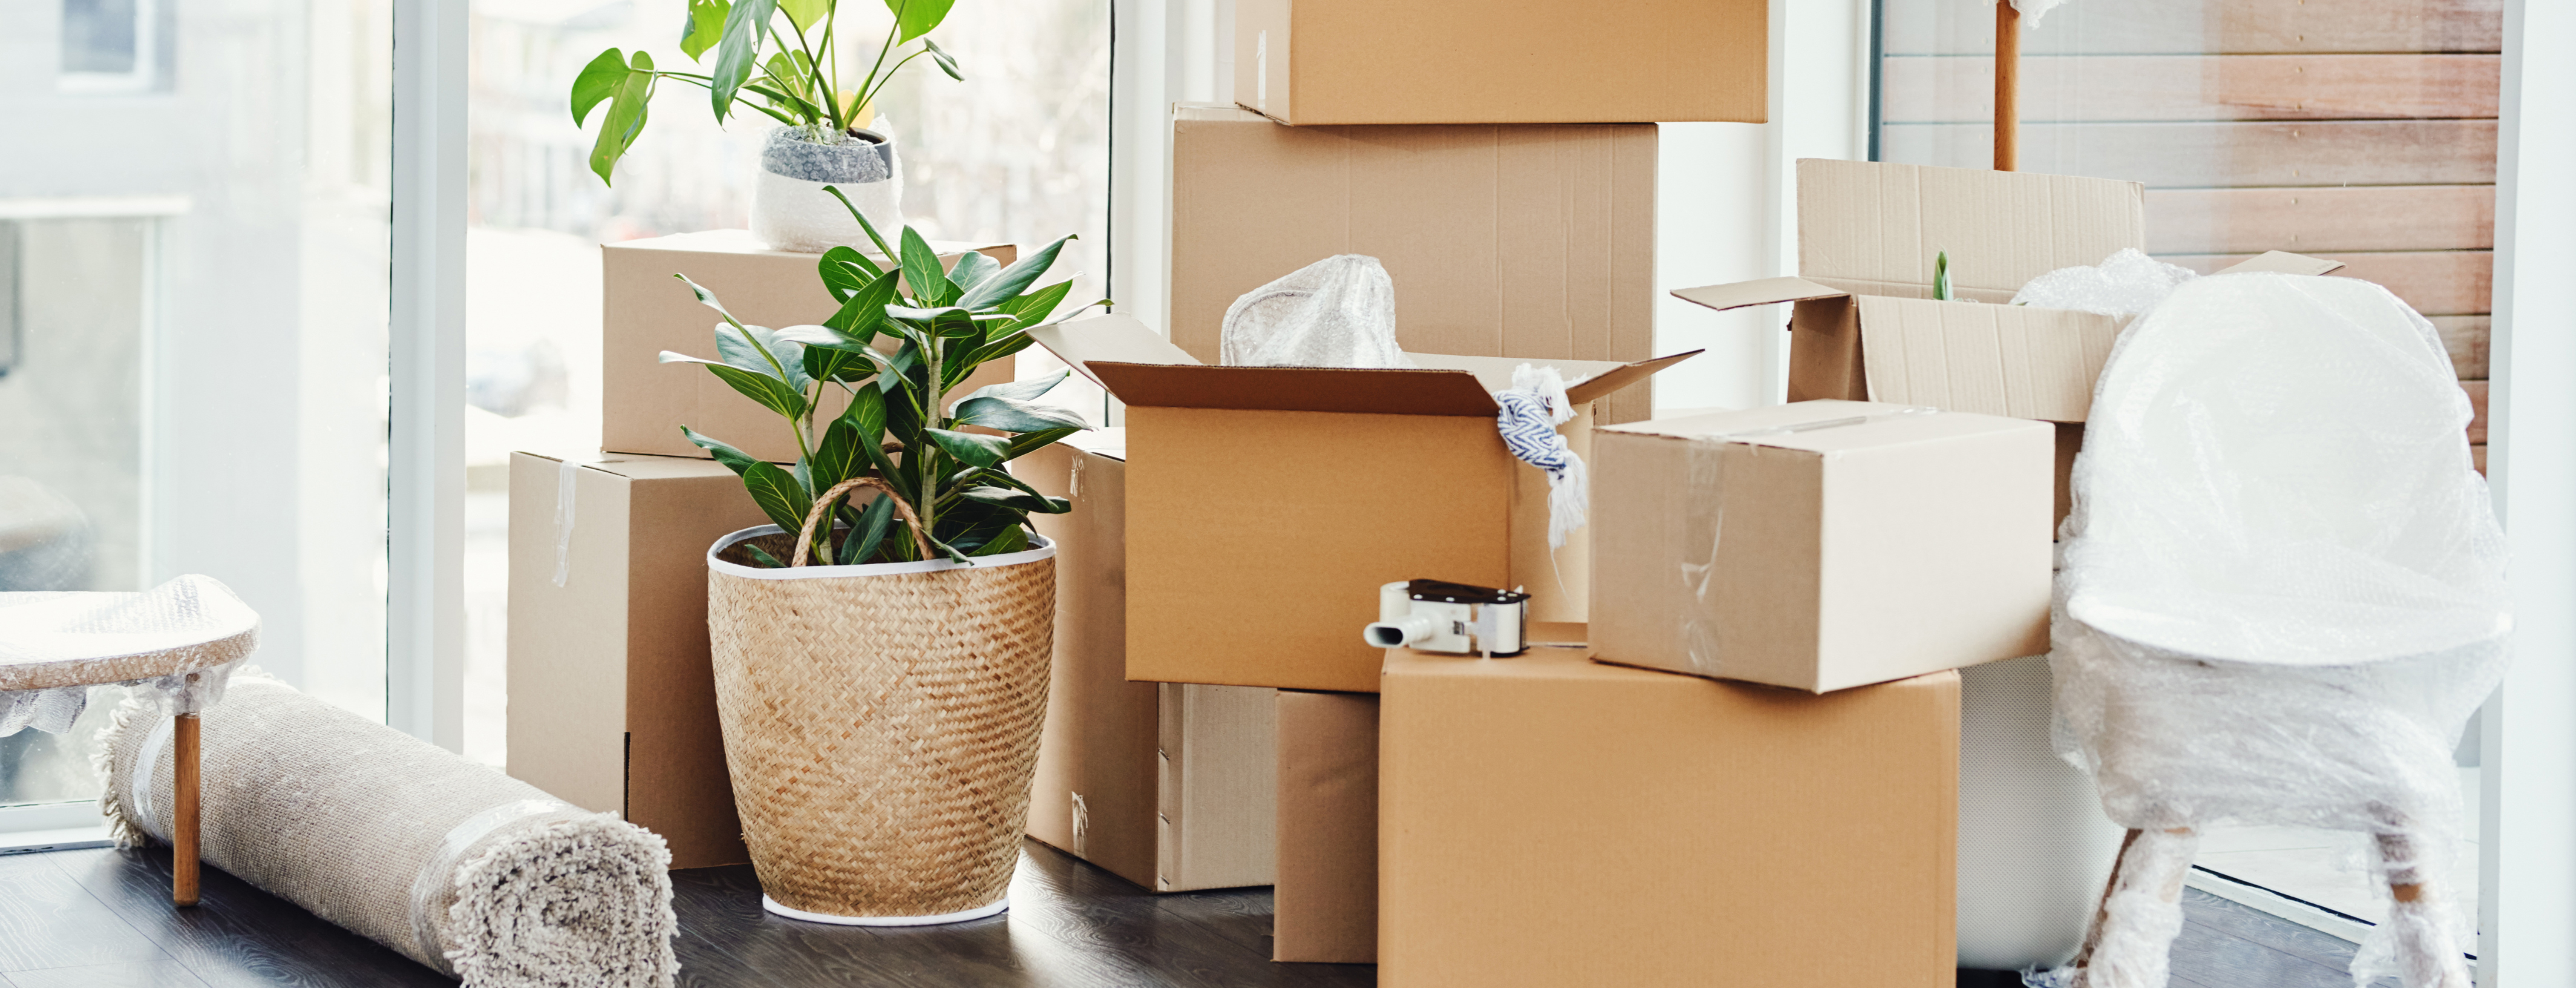 4 Useful Online Tools You Can Use If You’re Looking To Move In The Next 12 Months